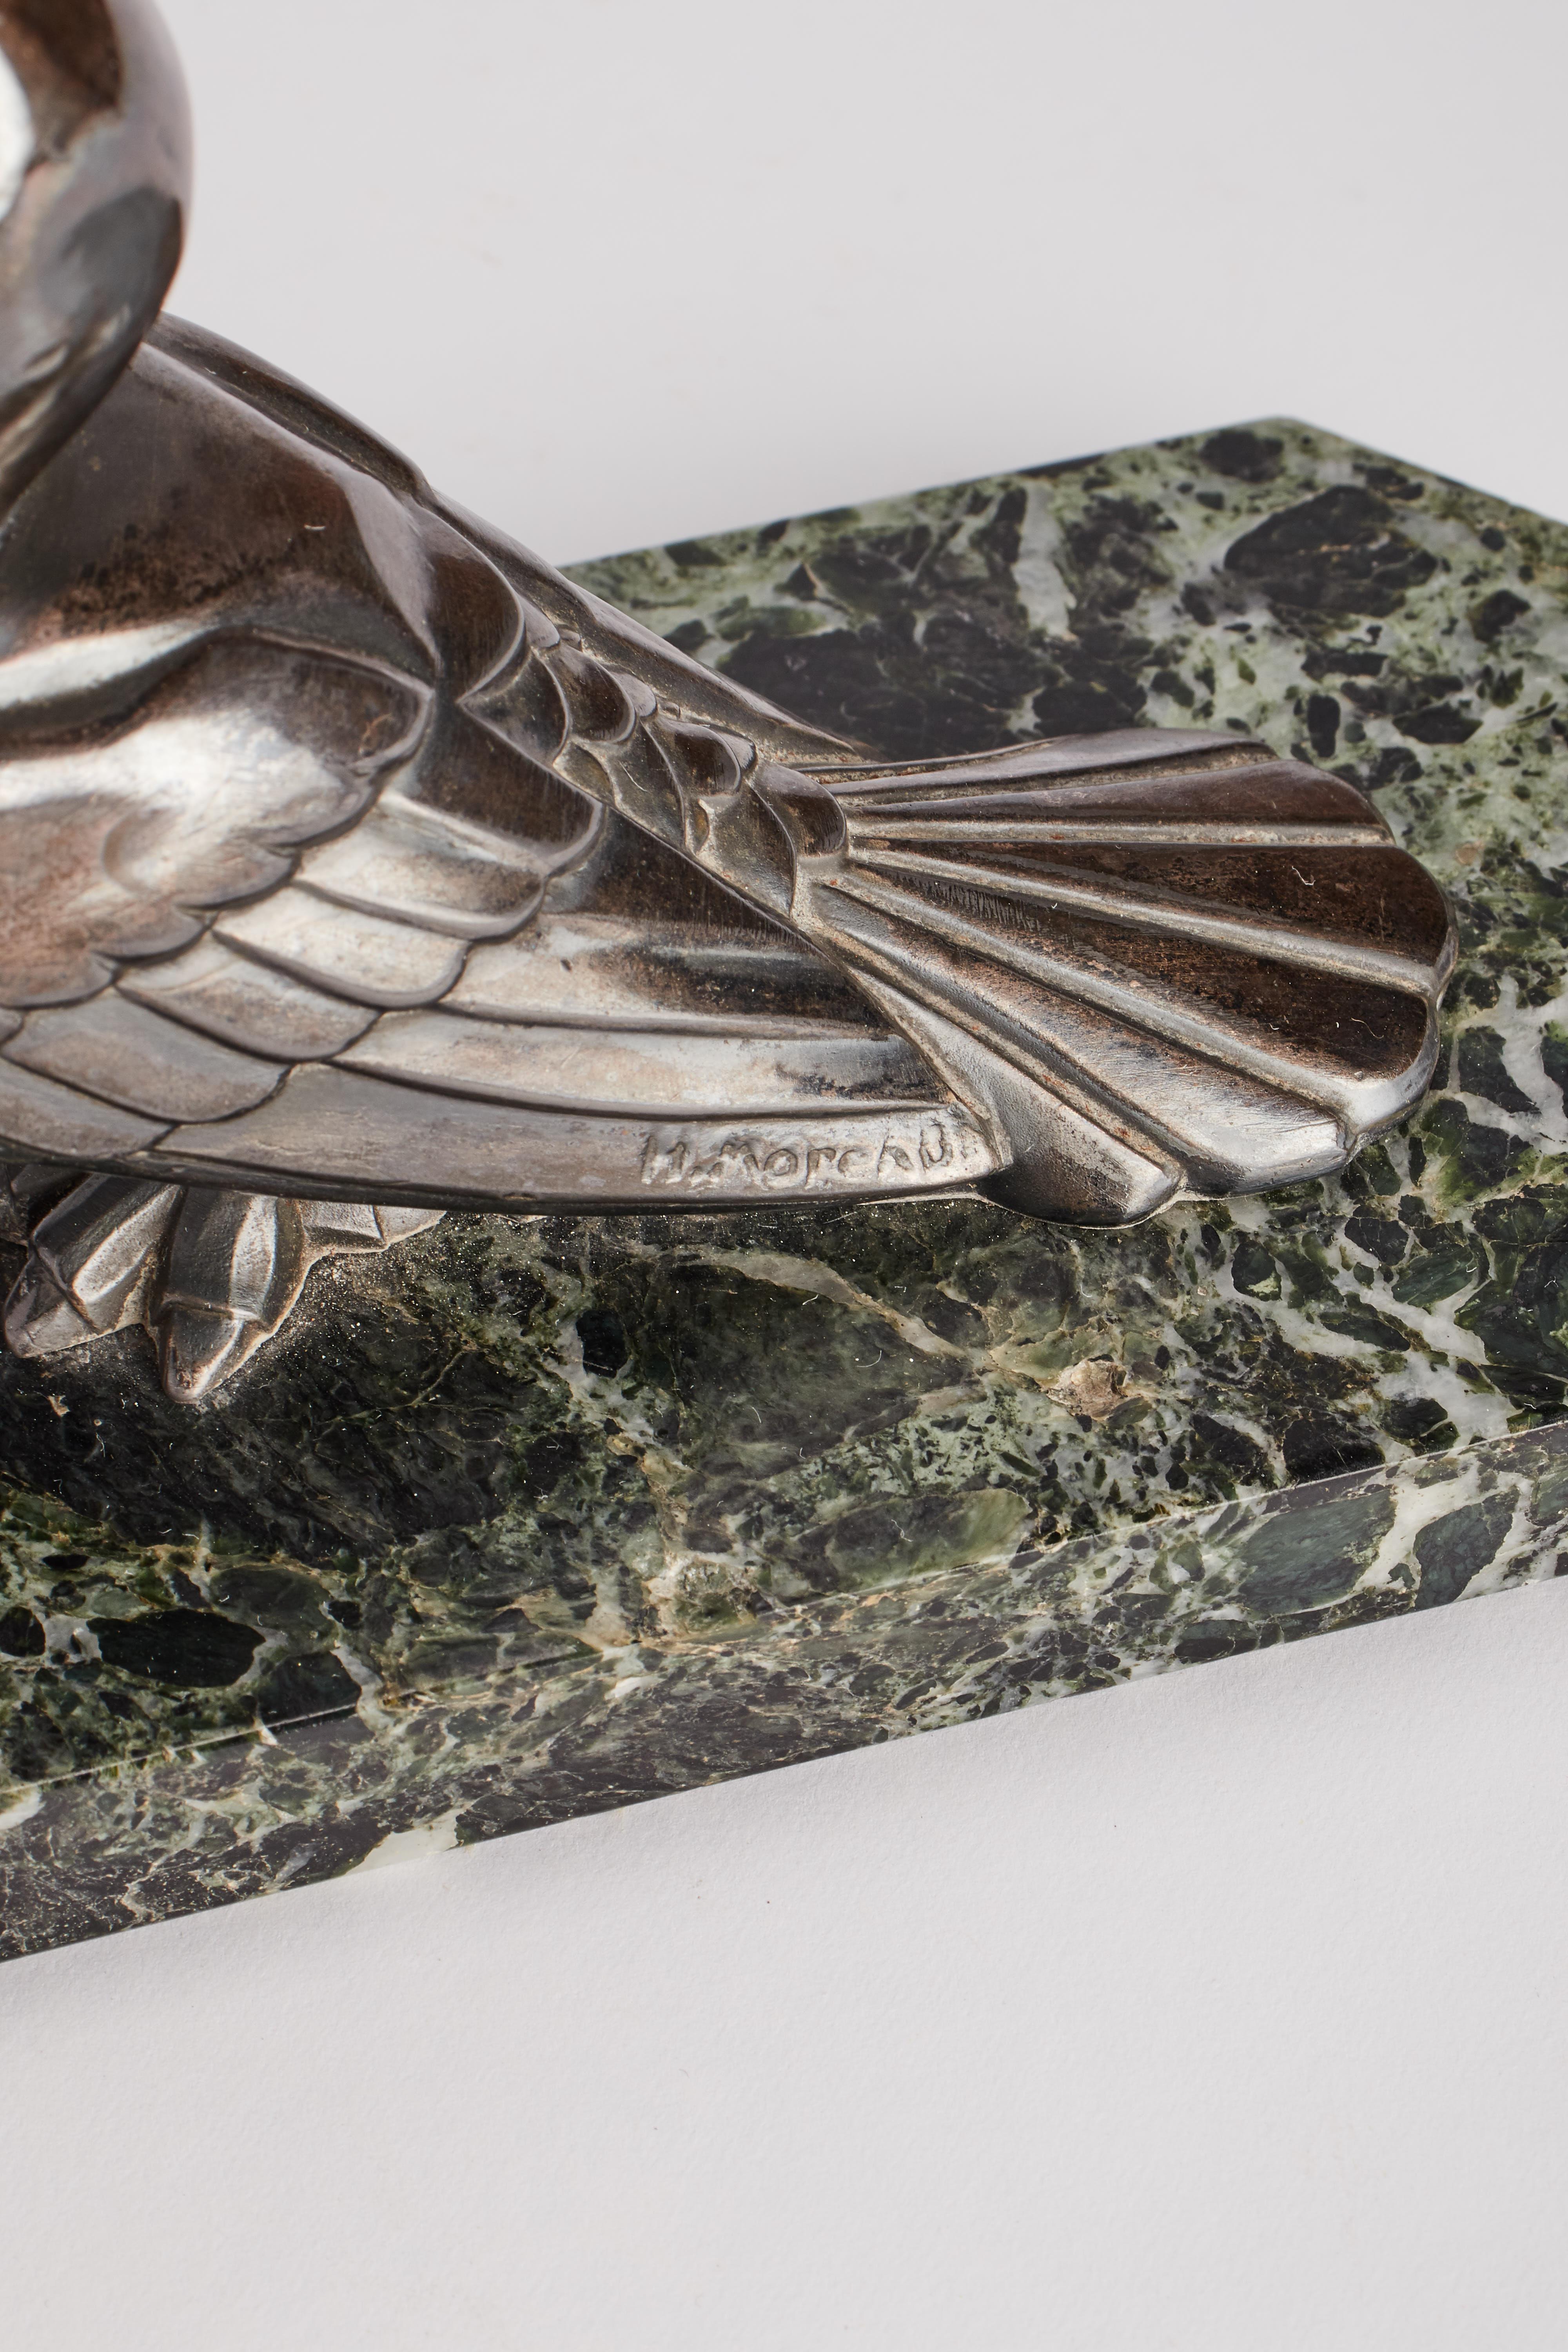 Pair of bookends. Green-veined marble. Over the L marble base, two identical white metal sculptures of birds Toucans, with a ball of amber in its beak. Art Deco’. Signed H. Moreau, France, circa 1925.